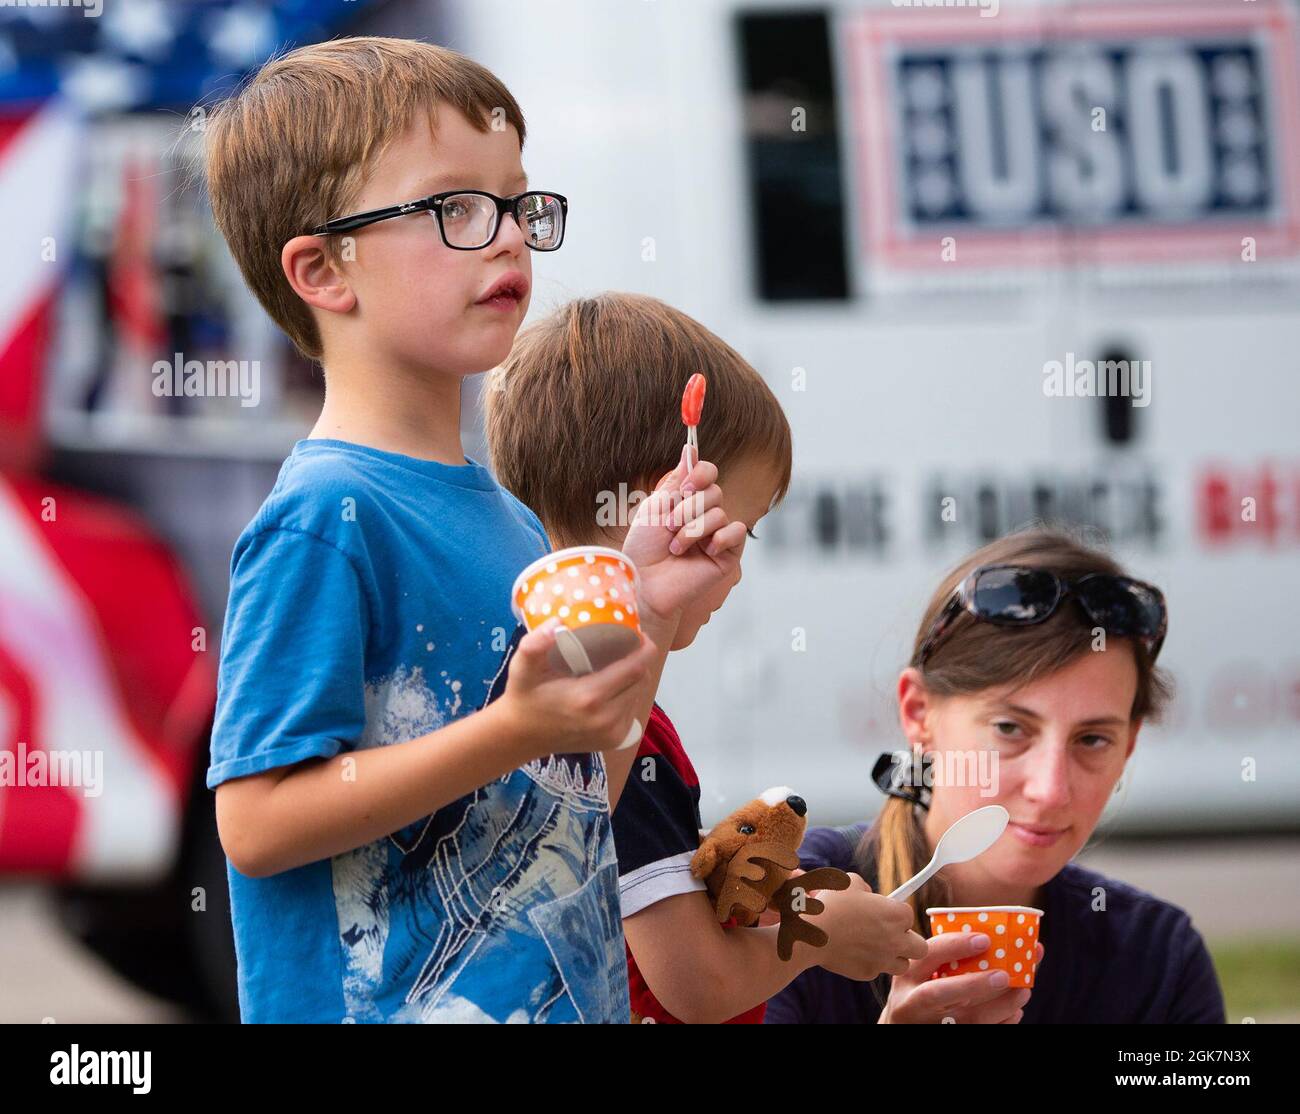 Tanya Collie, along with her sons Nathaniel , 9, and Noah, 6, have ice cream at the Women’s Equality Day event Aug. 27, 2021, on Wright-Patterson Air Force Base, Ohio. The event, marking the anniversary of the 19th Amendment’s ratification granting women the right to vote, featured live music, food, base organization booths and local women-owned craft vendors. Stock Photo